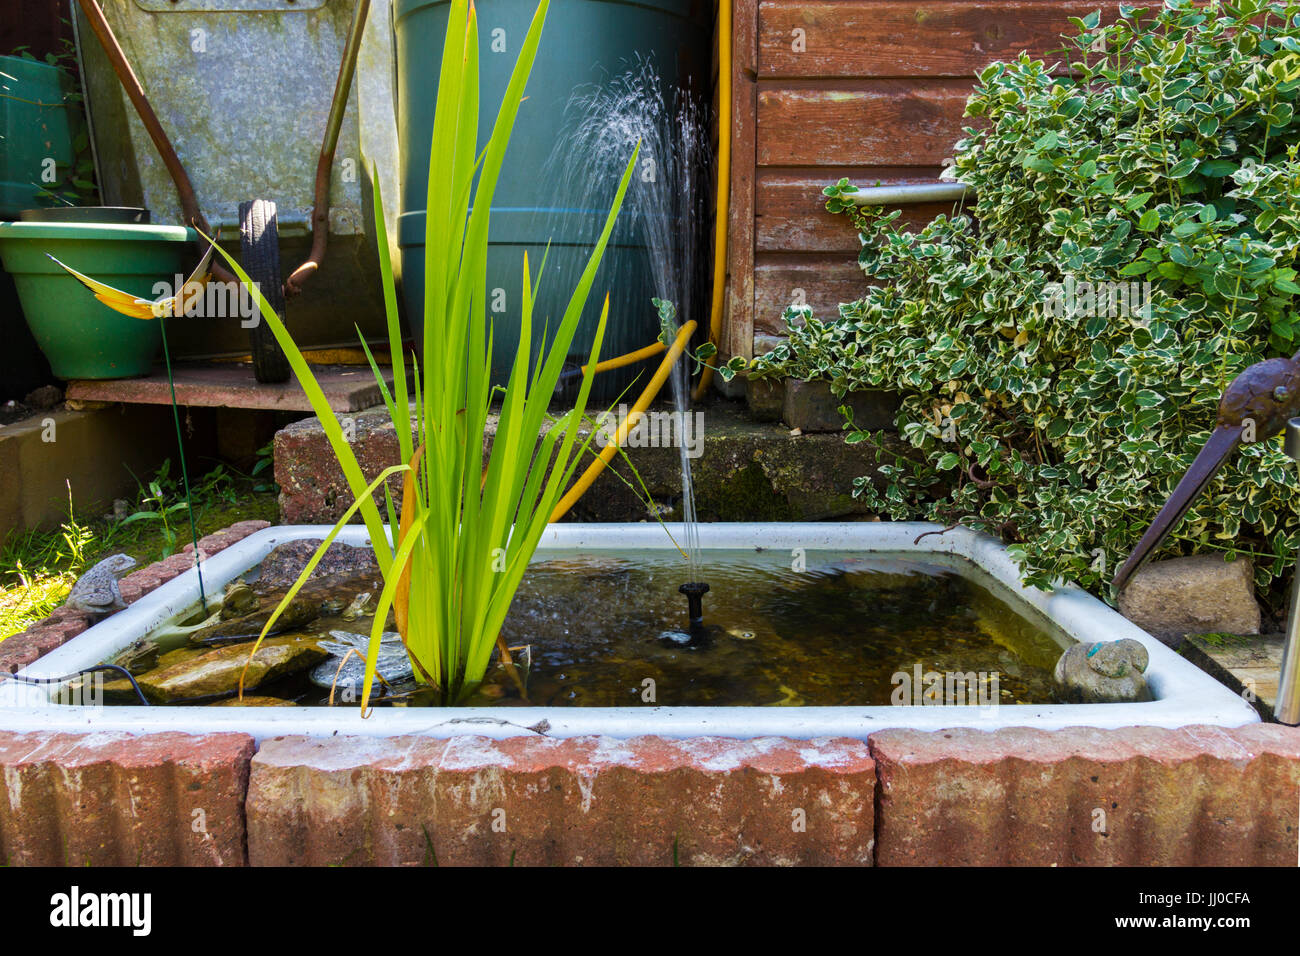 Garden Pond Using A Double Belfast Type Old Sink Lowered